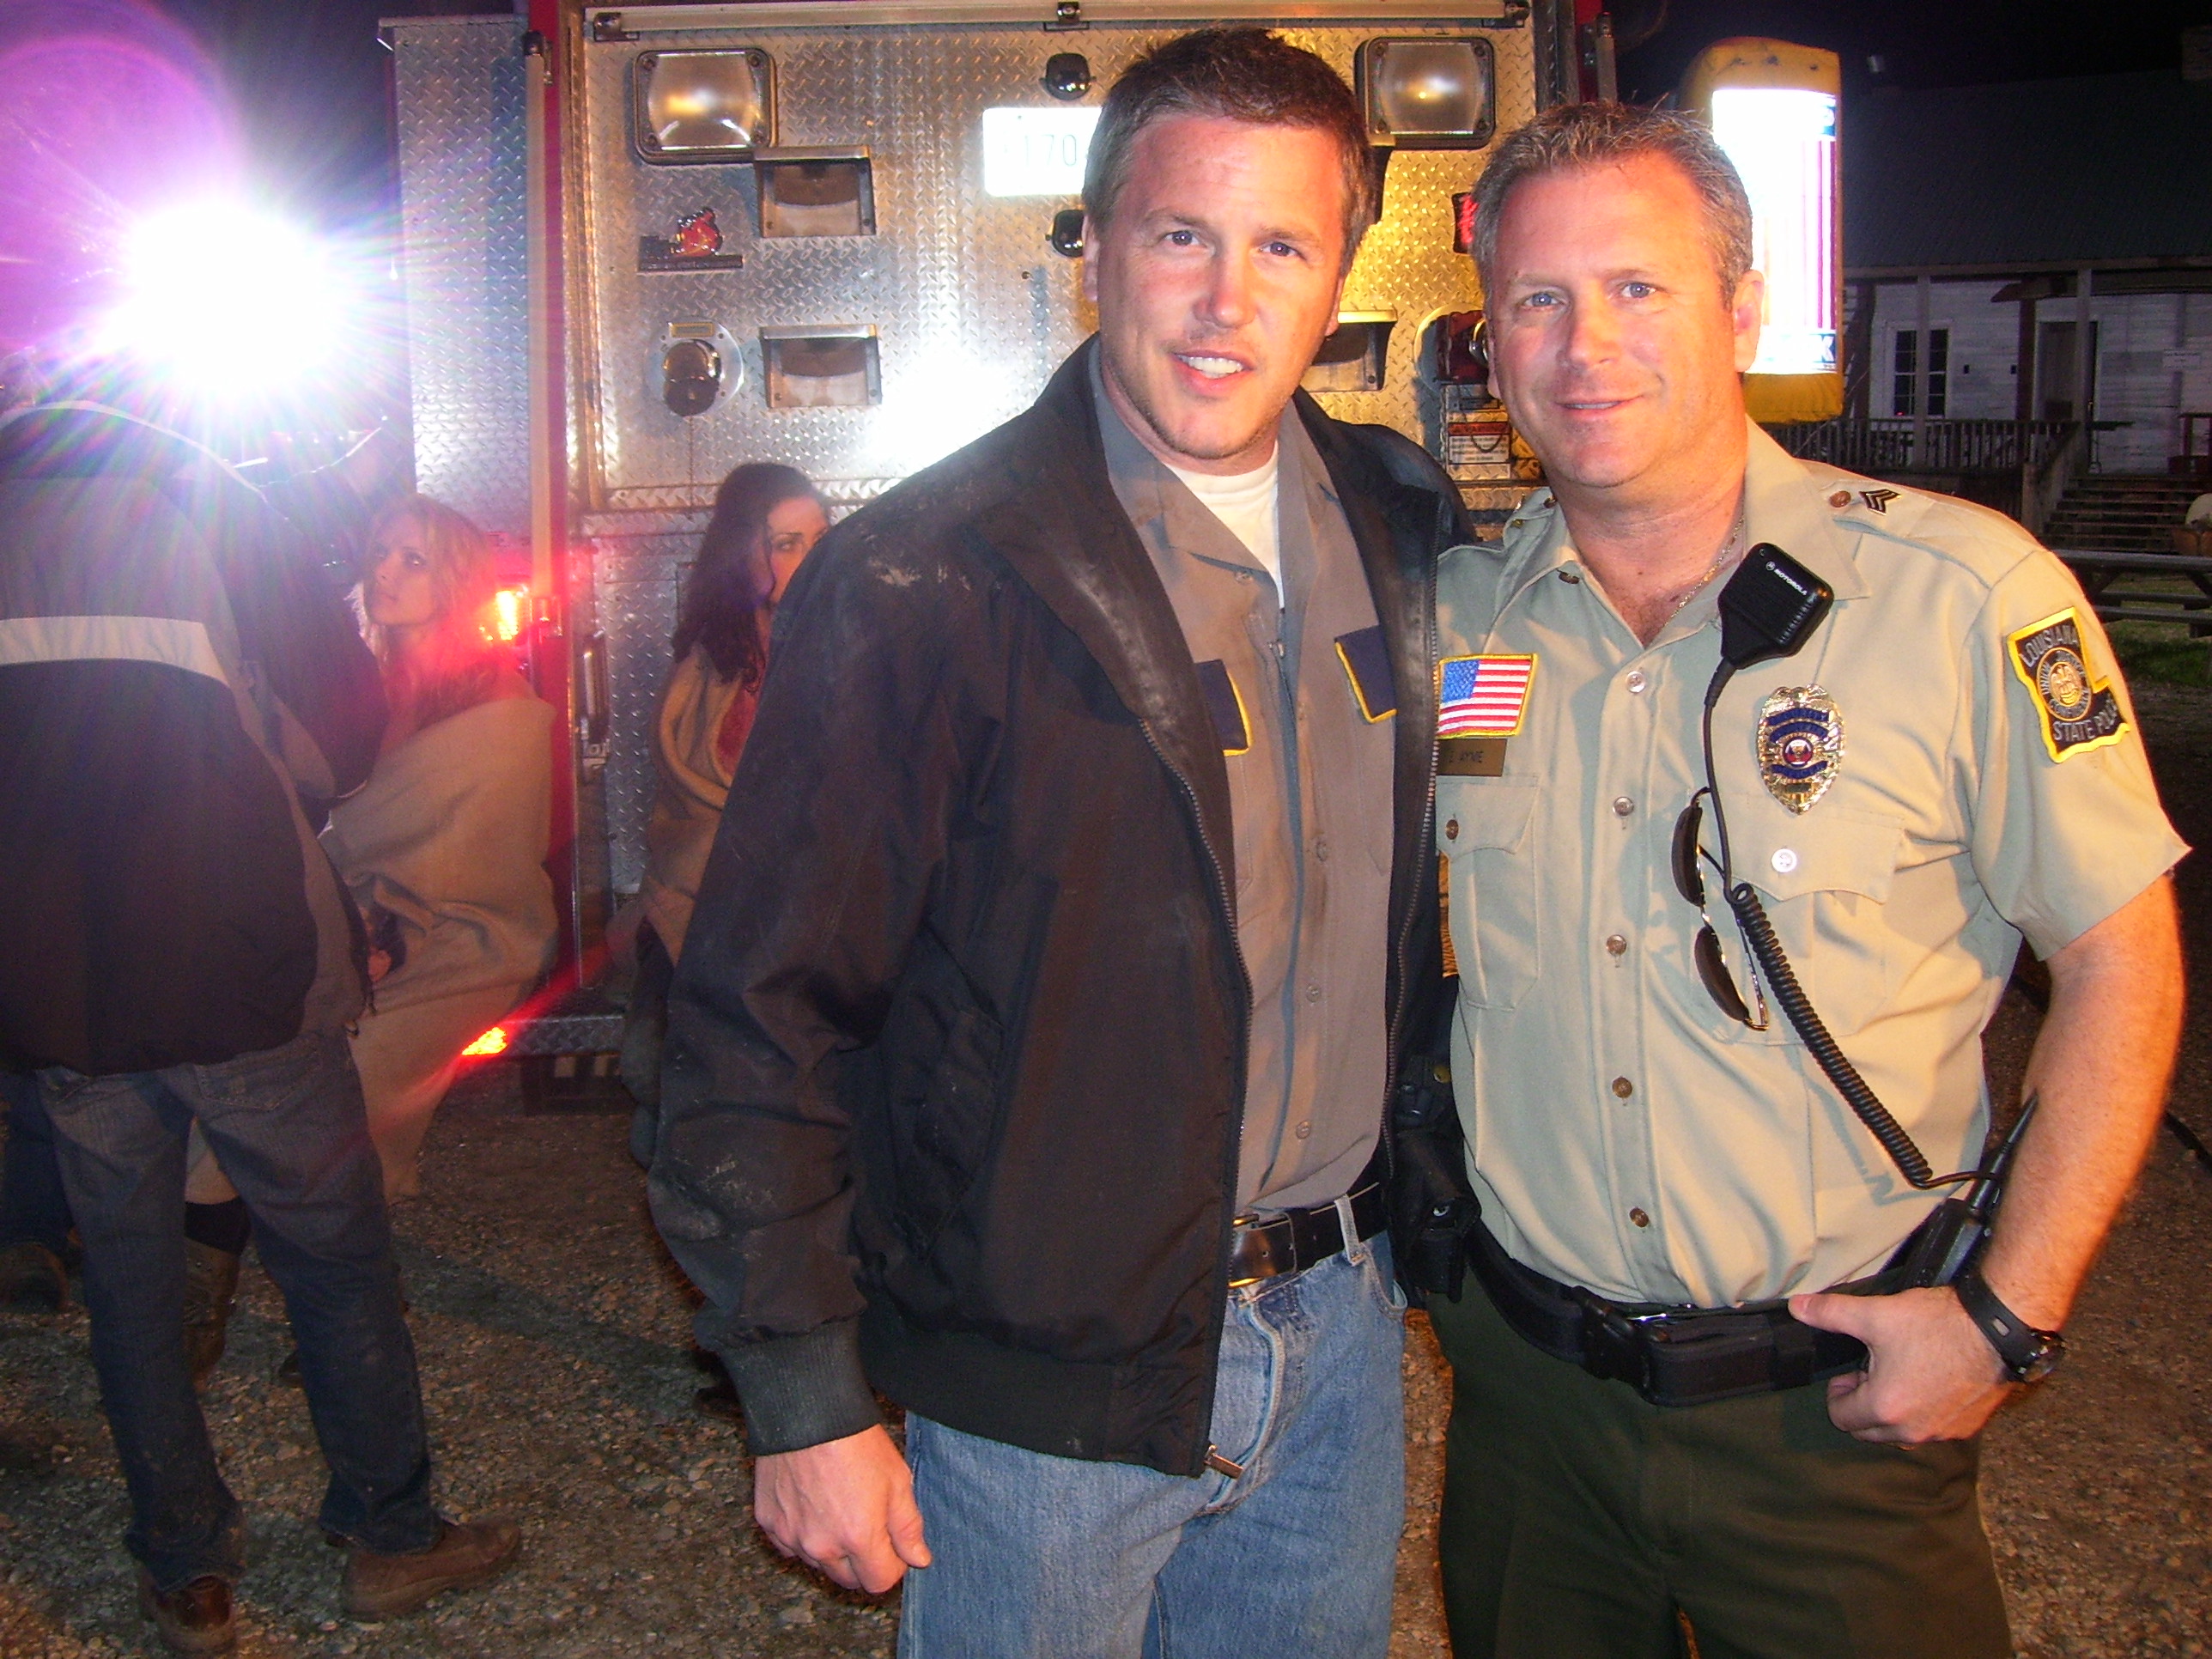 Tony Senzamici as State Trooper Ayme & Lochlyn Munro on the set of Xtinction.